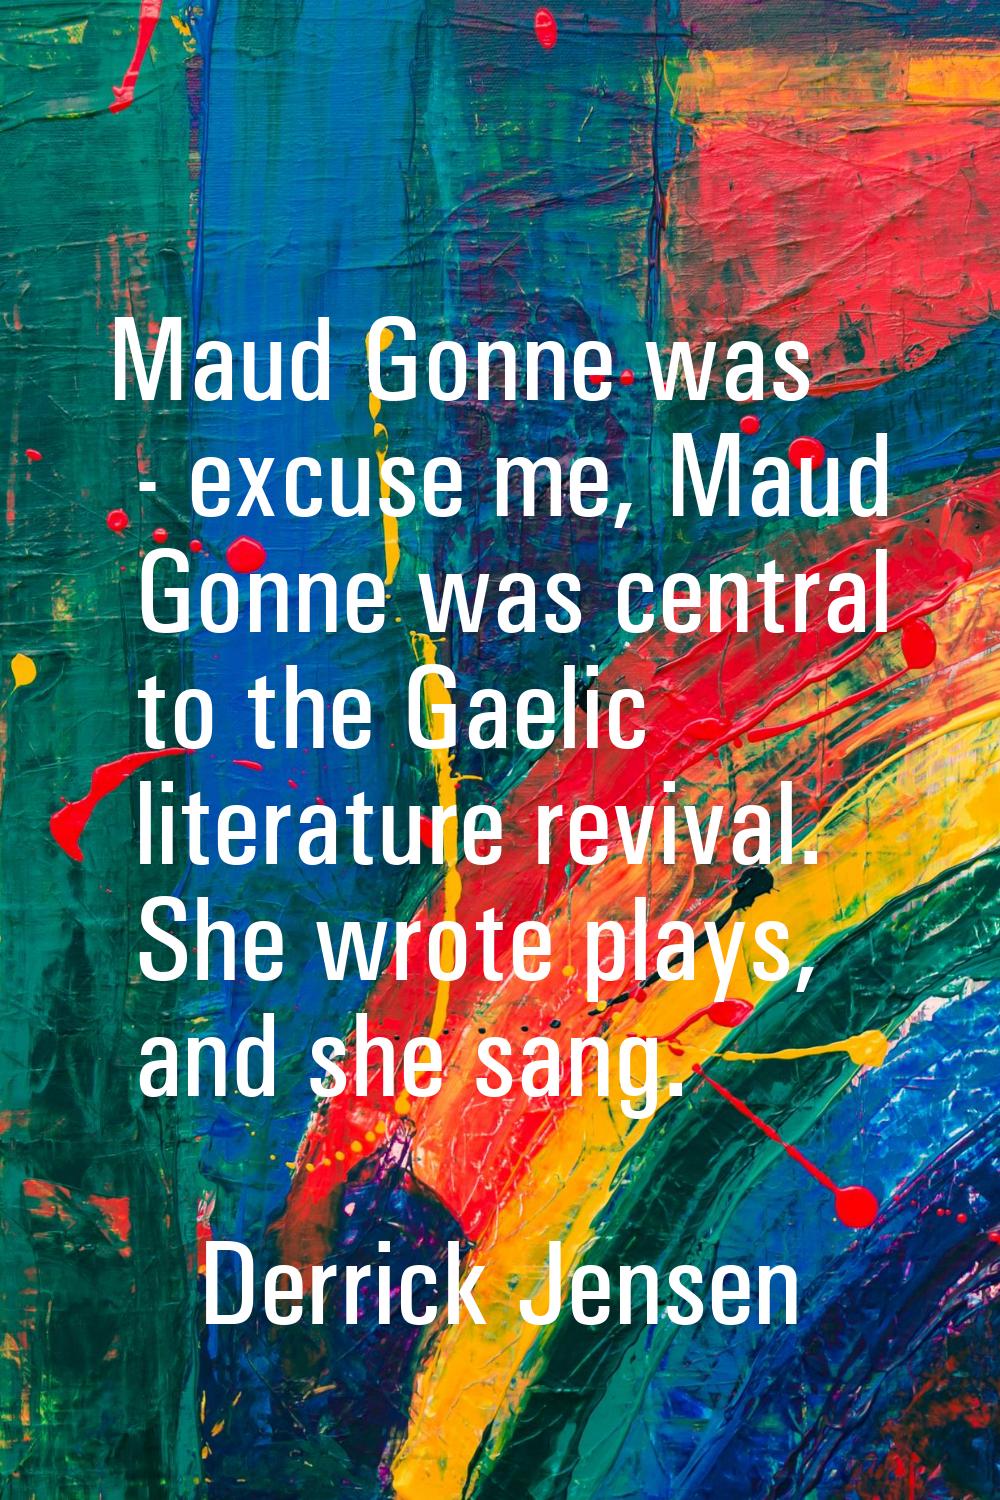 Maud Gonne was - excuse me, Maud Gonne was central to the Gaelic literature revival. She wrote play